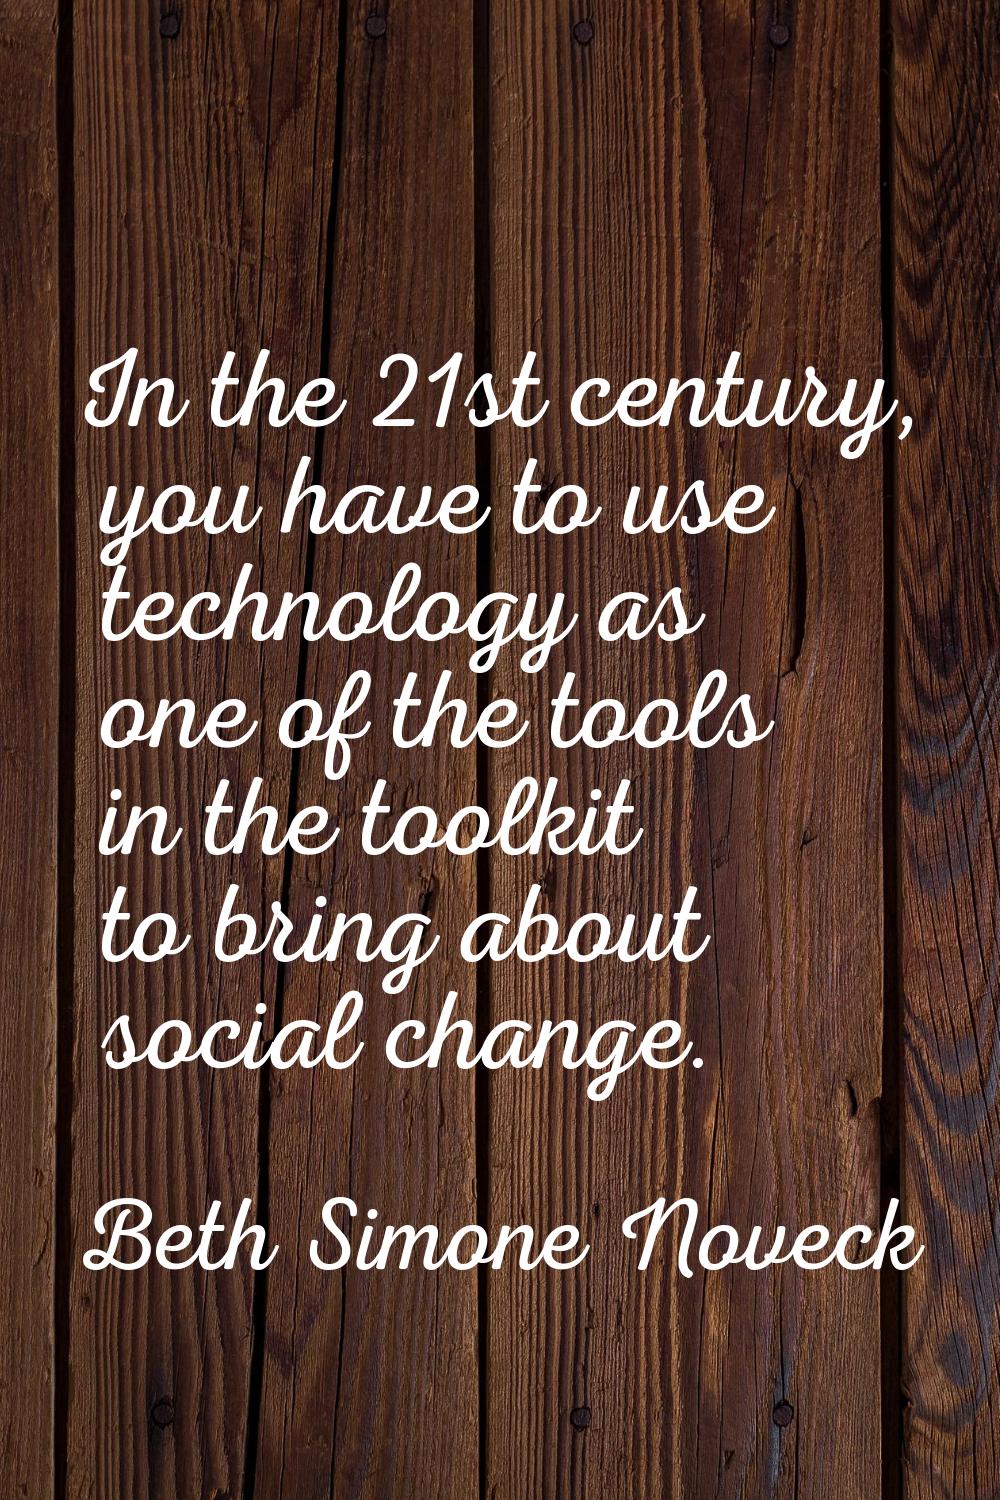 In the 21st century, you have to use technology as one of the tools in the toolkit to bring about s